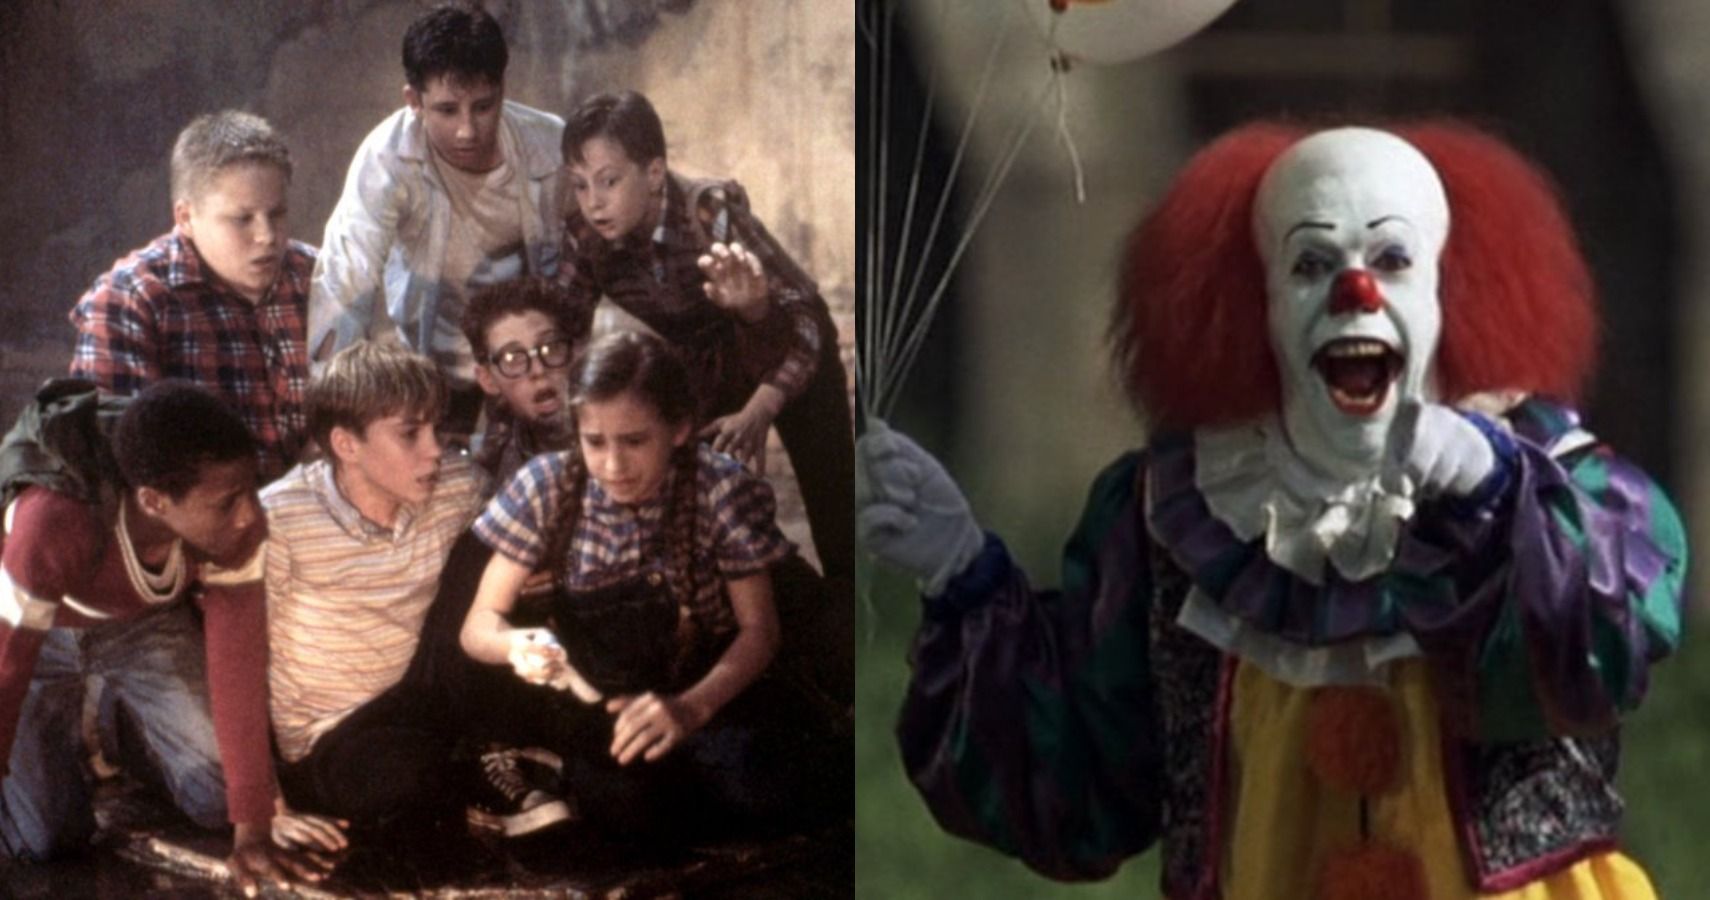 IT: 10 Scenes From The Tim Curry Miniseries That Are Still Scary